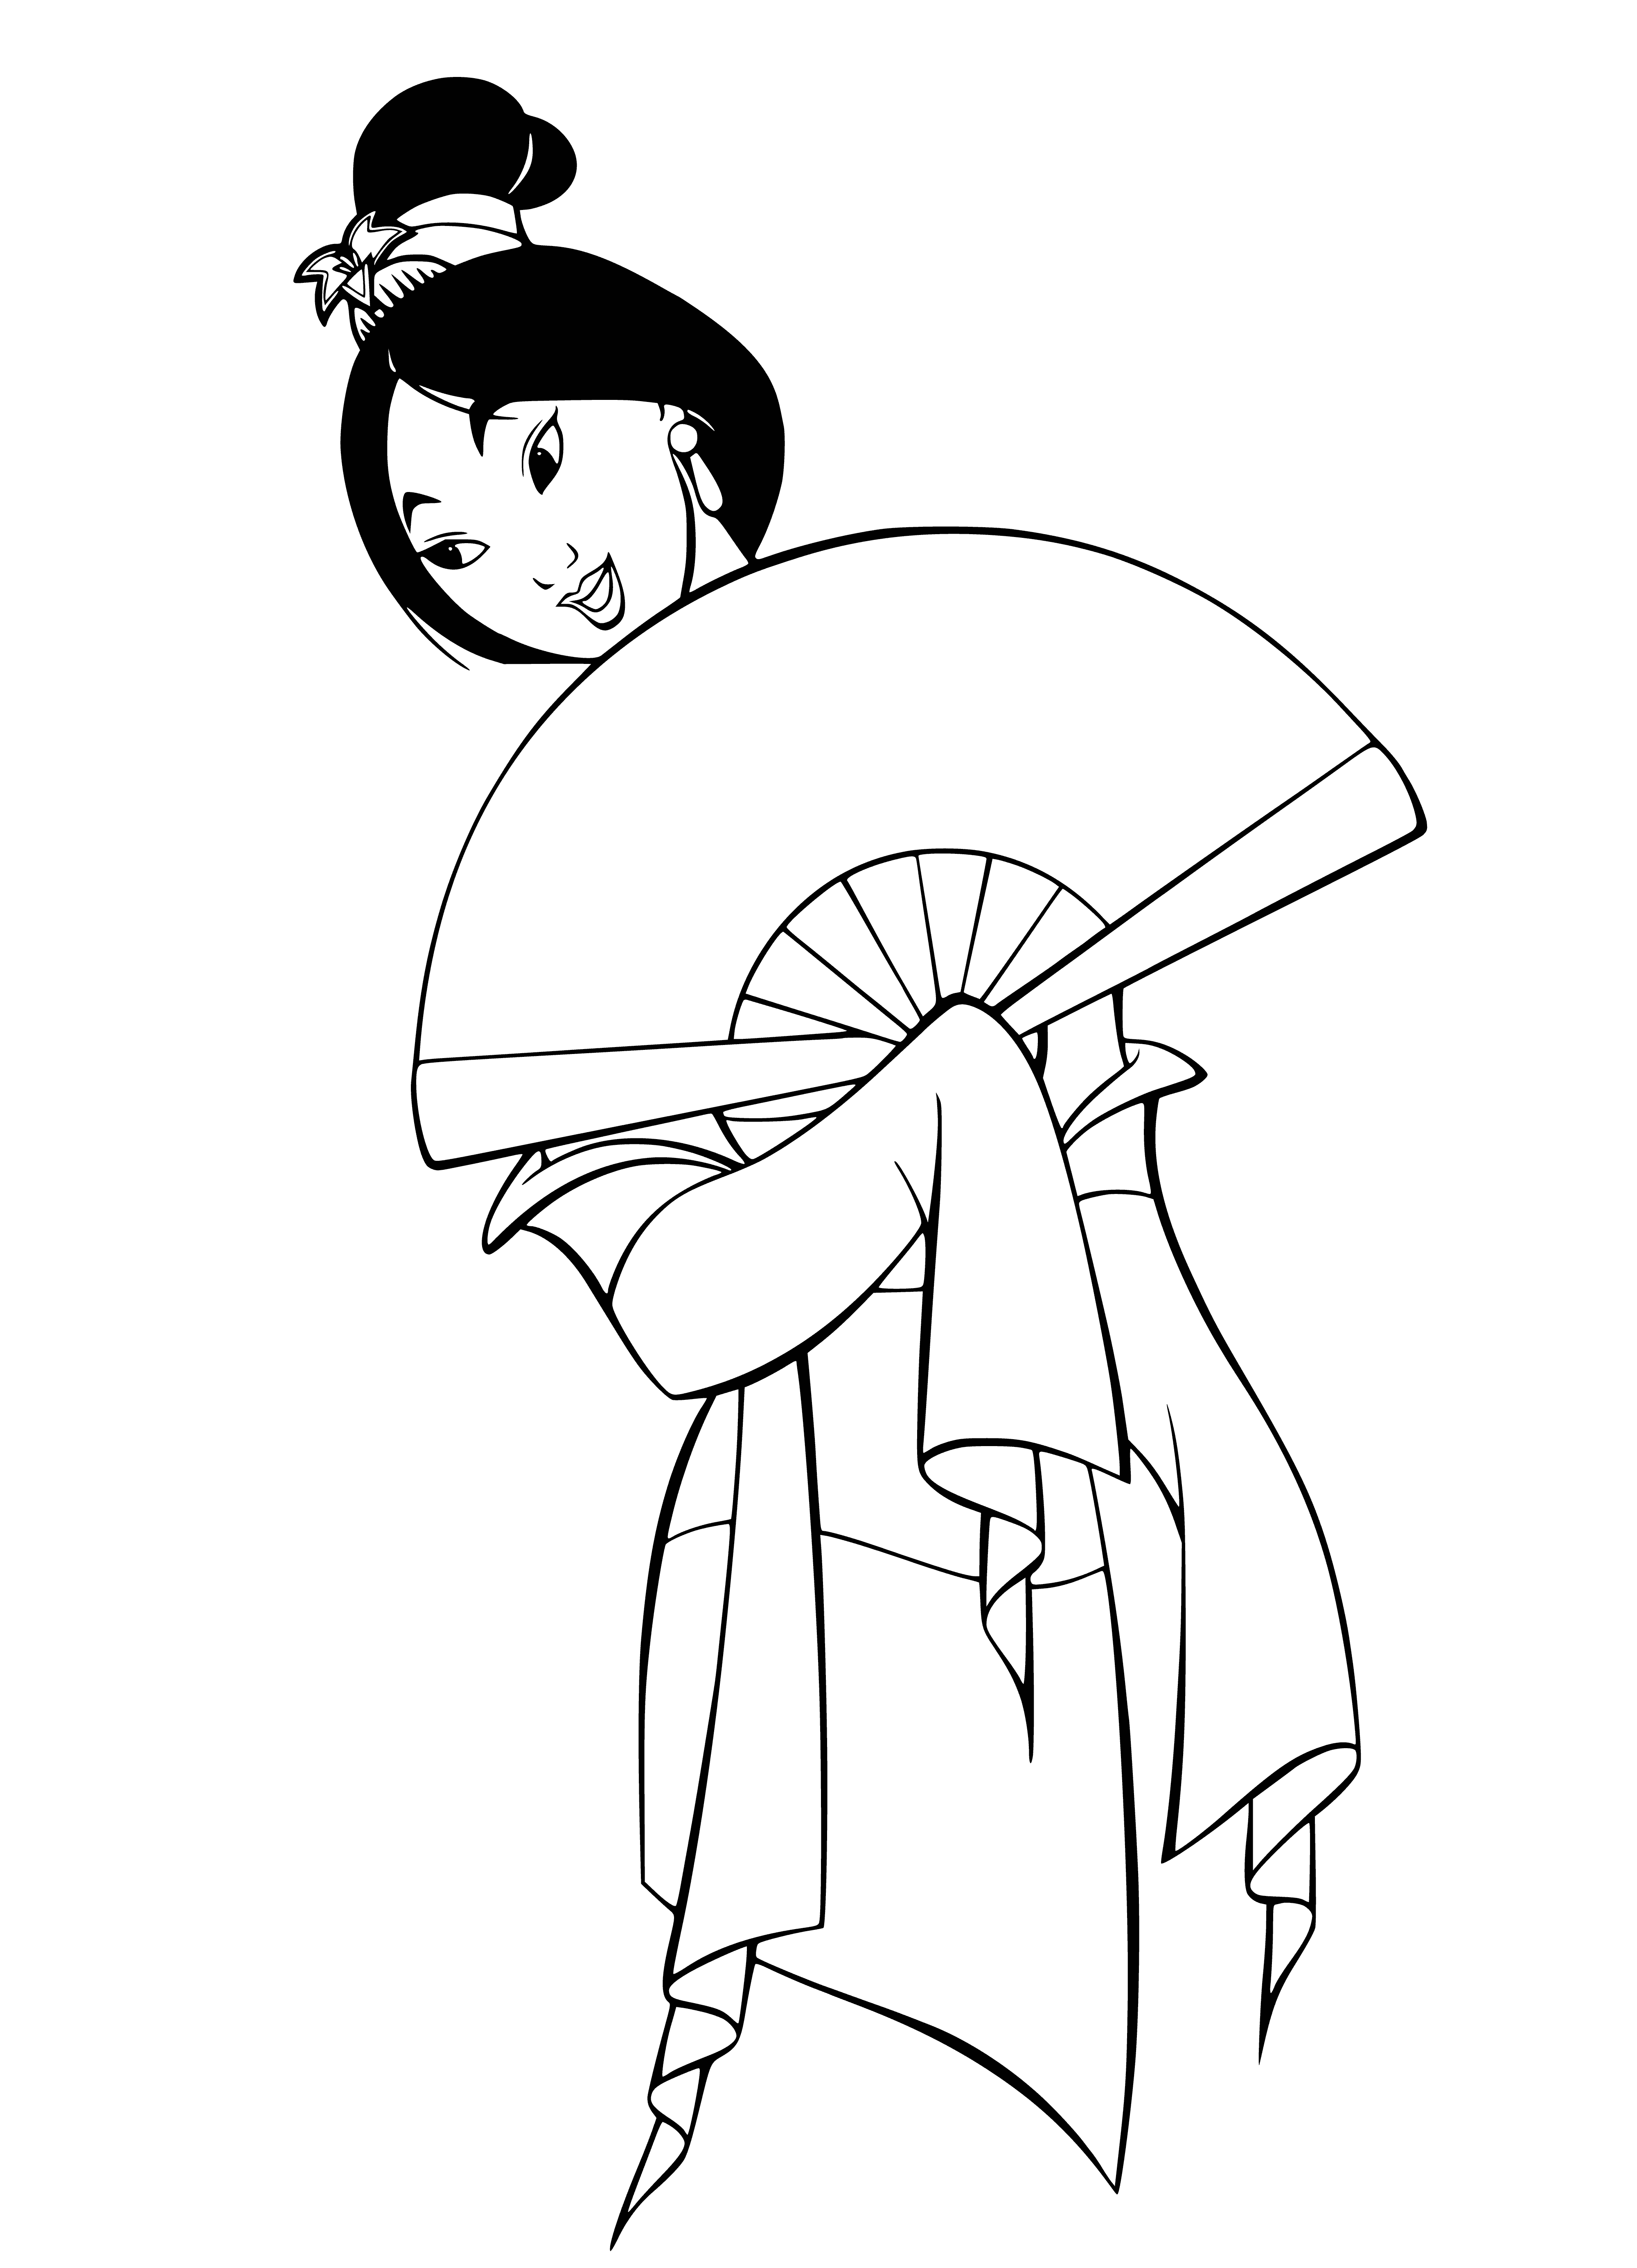 Mulan with a fan coloring page